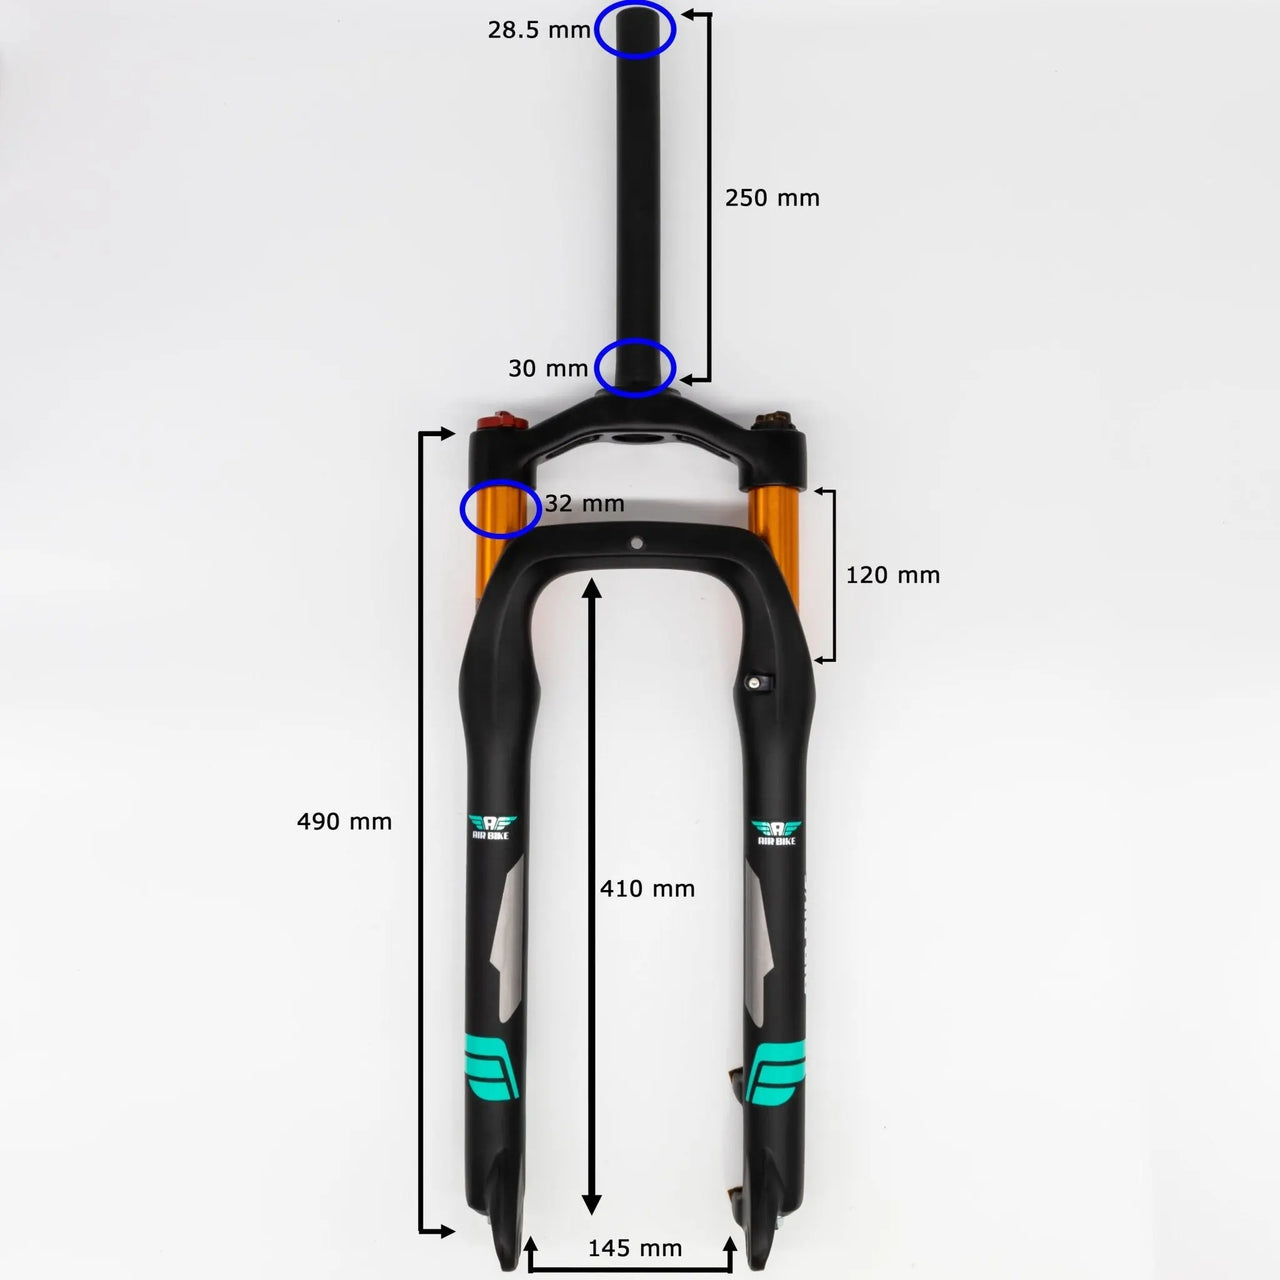 26 Inch Fat Tyre Suspension Fork 120mm Travel + Lockout Black - Air Bike - Air BikeSuspension Fork